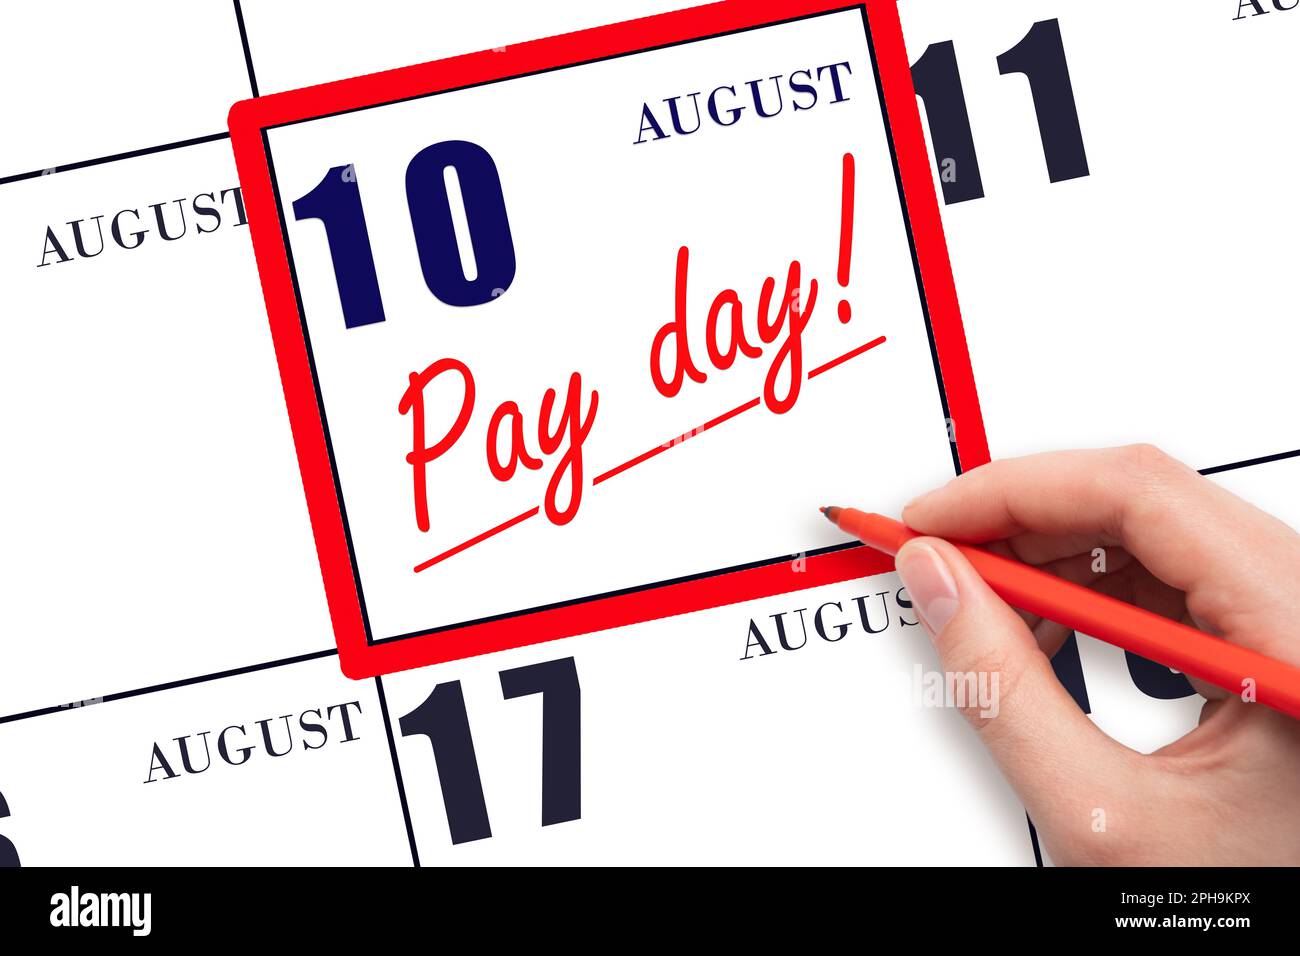 10th day of August. Hand writing text PAY DATE on calendar date August 10 and underline it. Payment due date. Reminder concept of payment. Summer mont Stock Photo